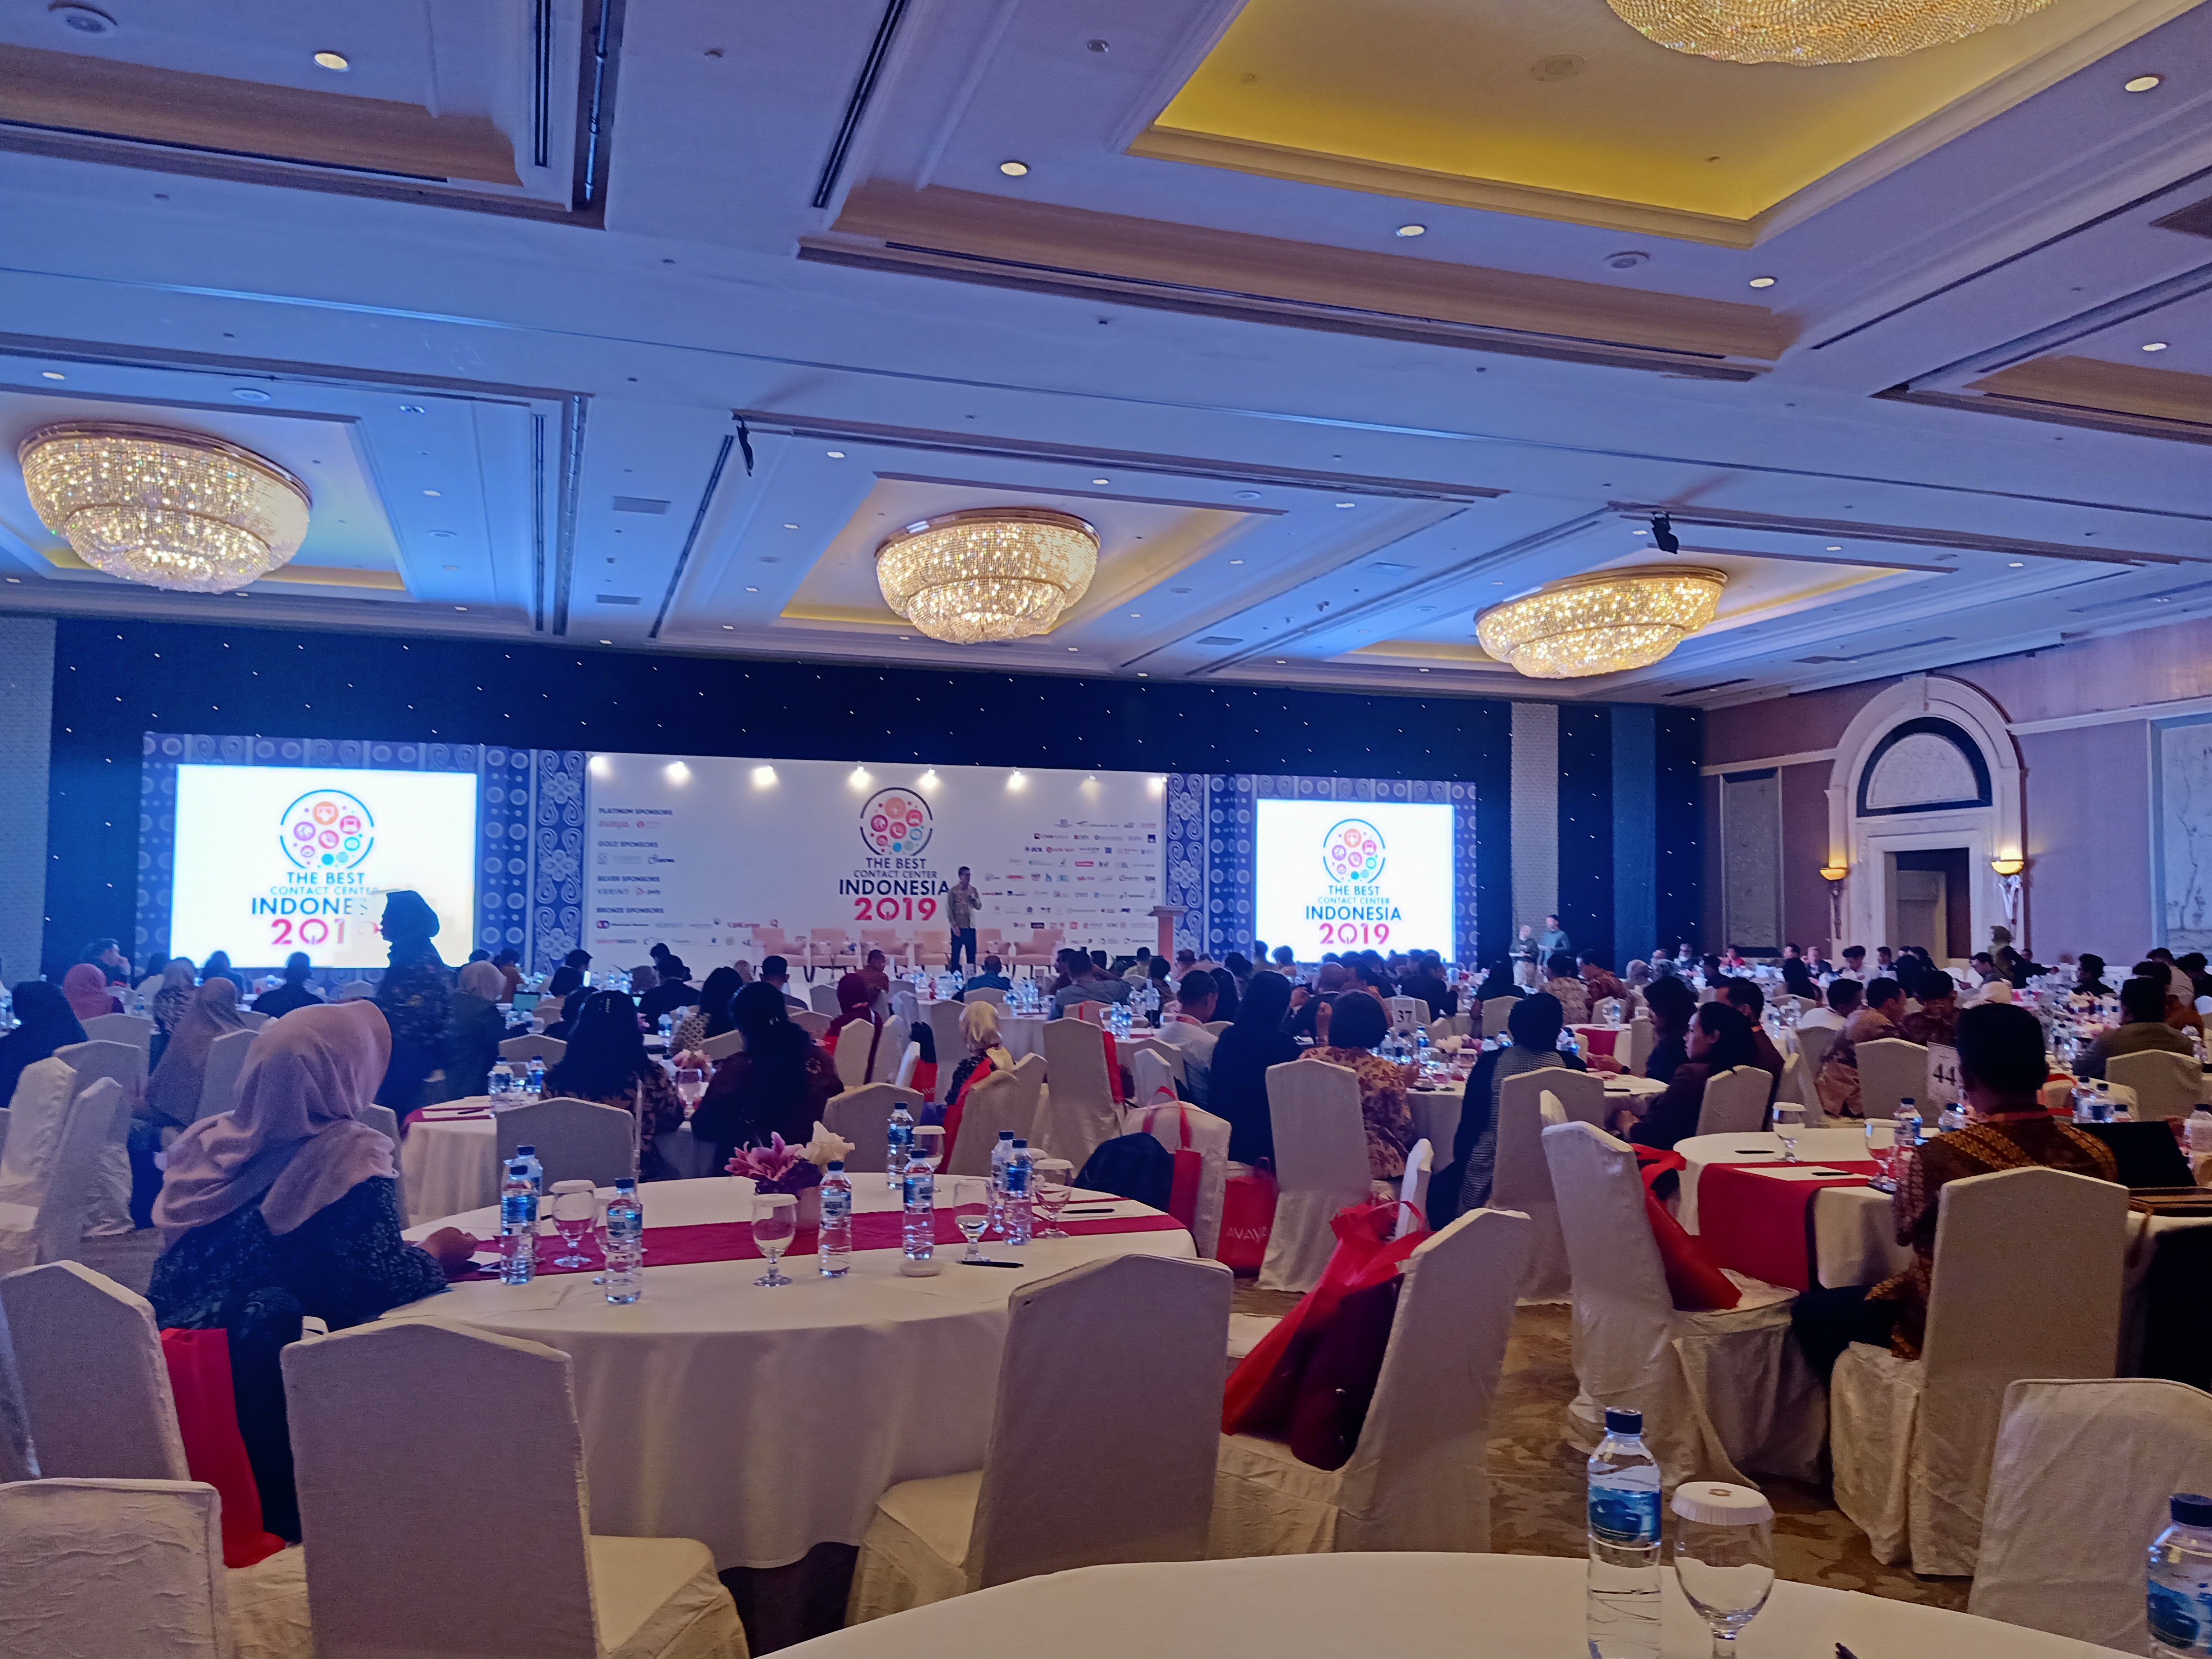 MitraComm Ekasarana and Phintraco Technology Participate at “The Best Contact Center Indonesia 2019”